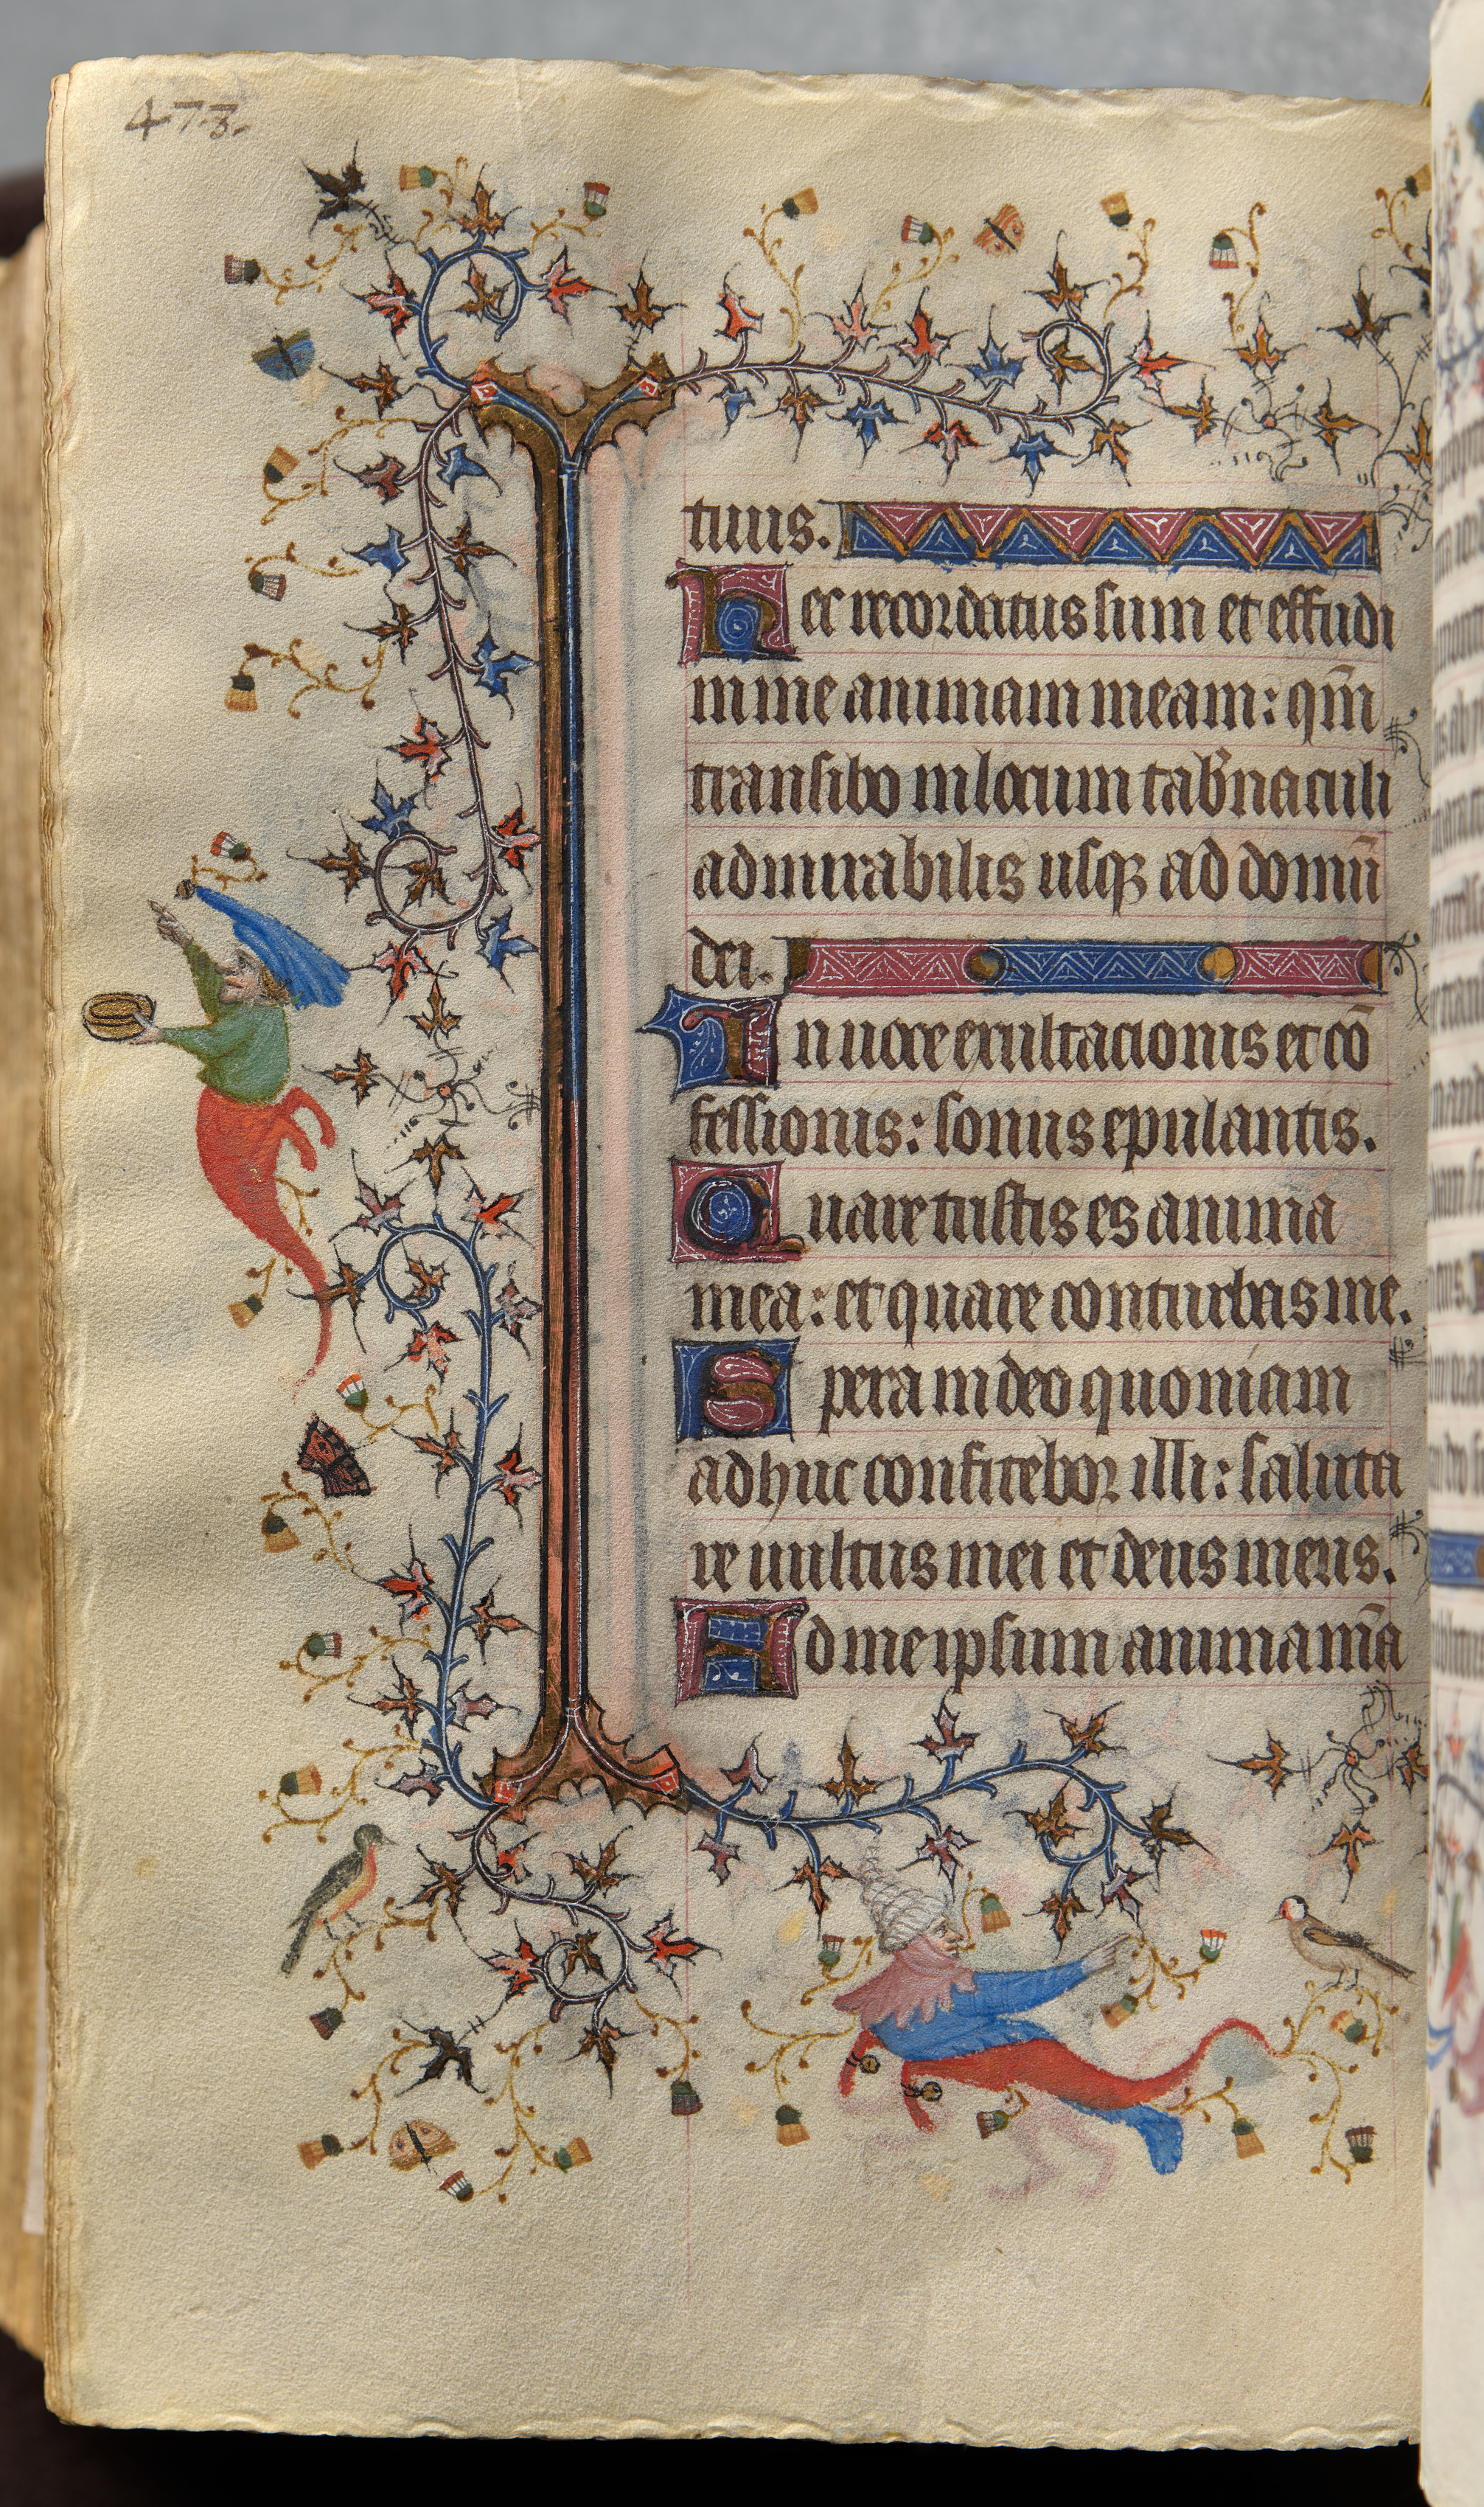 Hours of Charles the Noble, King of Navarre (1361-1425): fol. 233v, Text